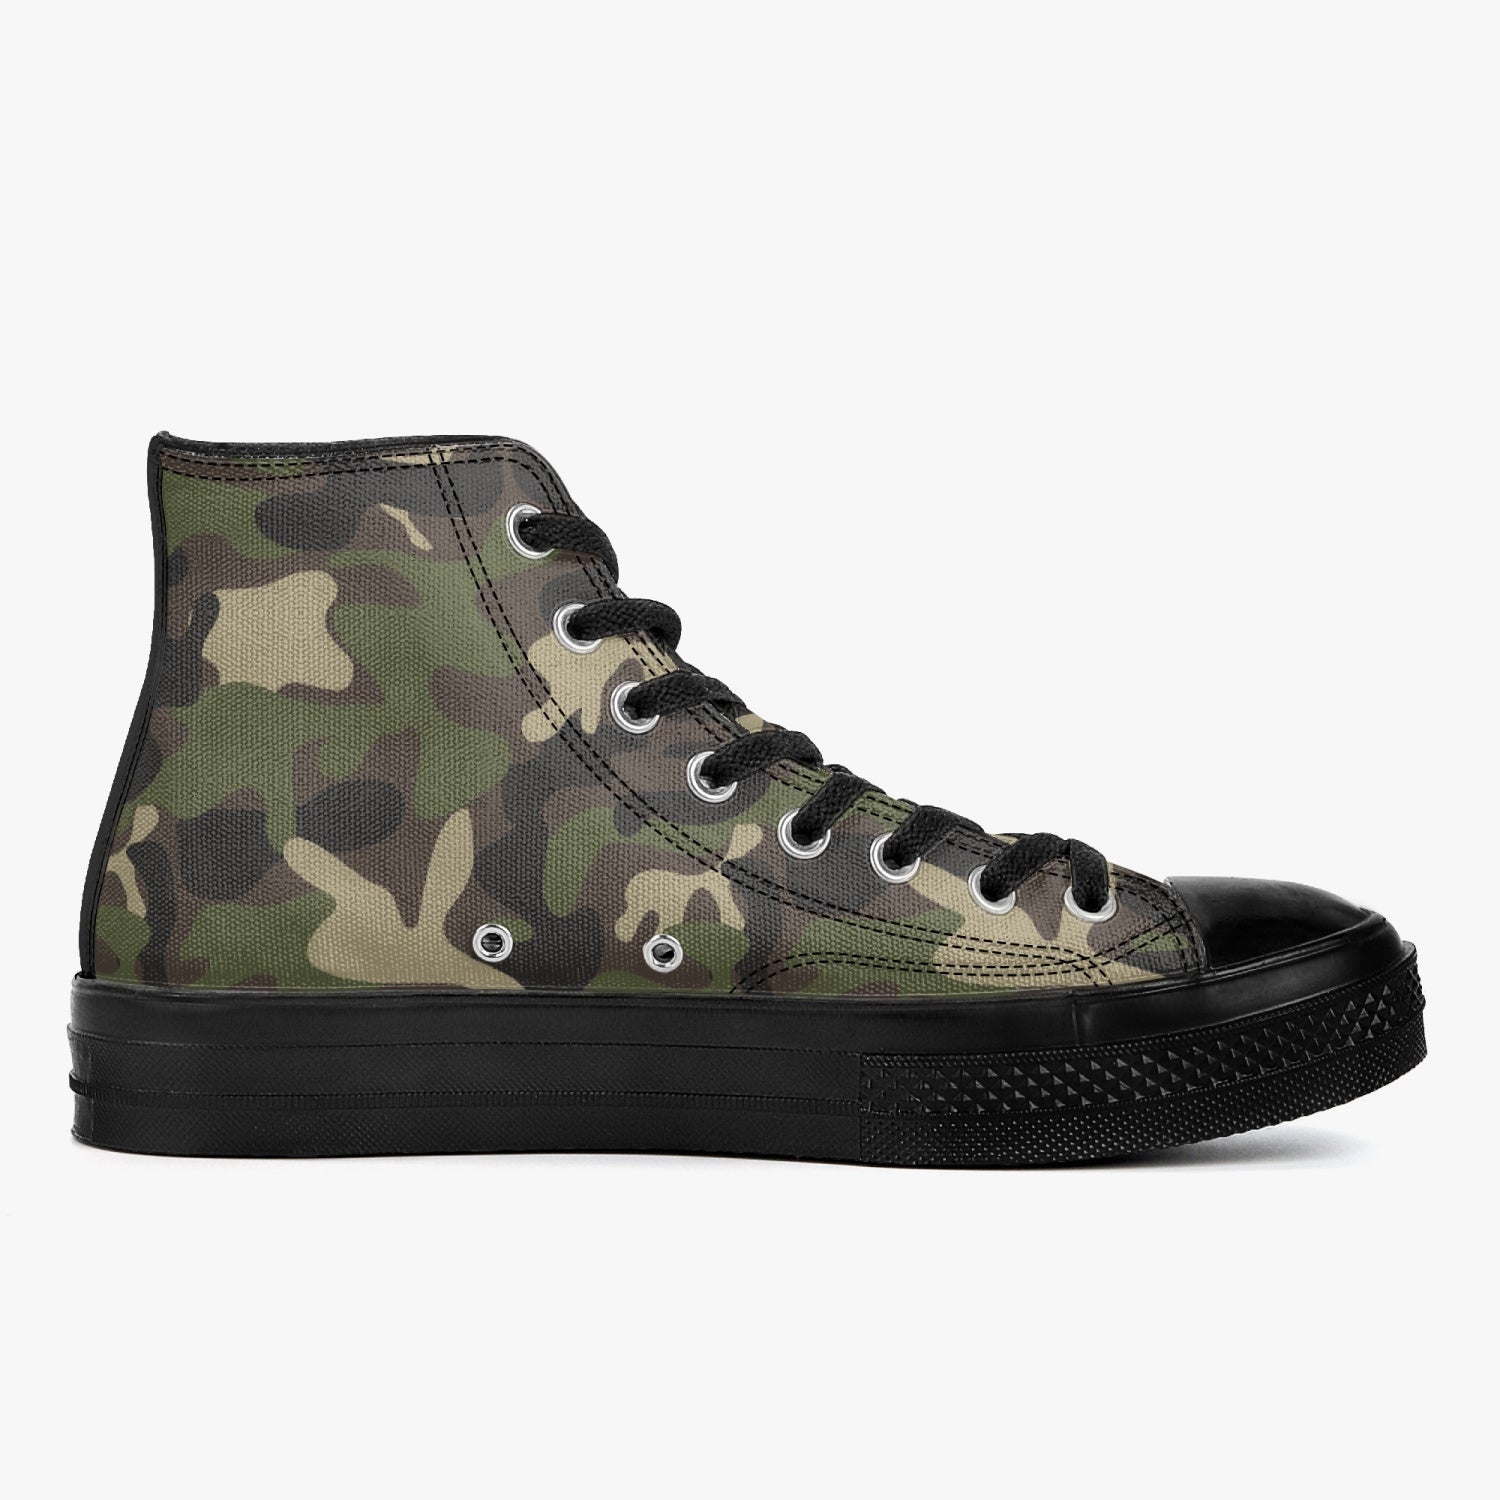 Camo High Top Shoes, Green Camouflage Black Lace Up Sneakers Footwear Rave Canvas Streatwear Designer Men Women Gift Idea Starcove Fashion